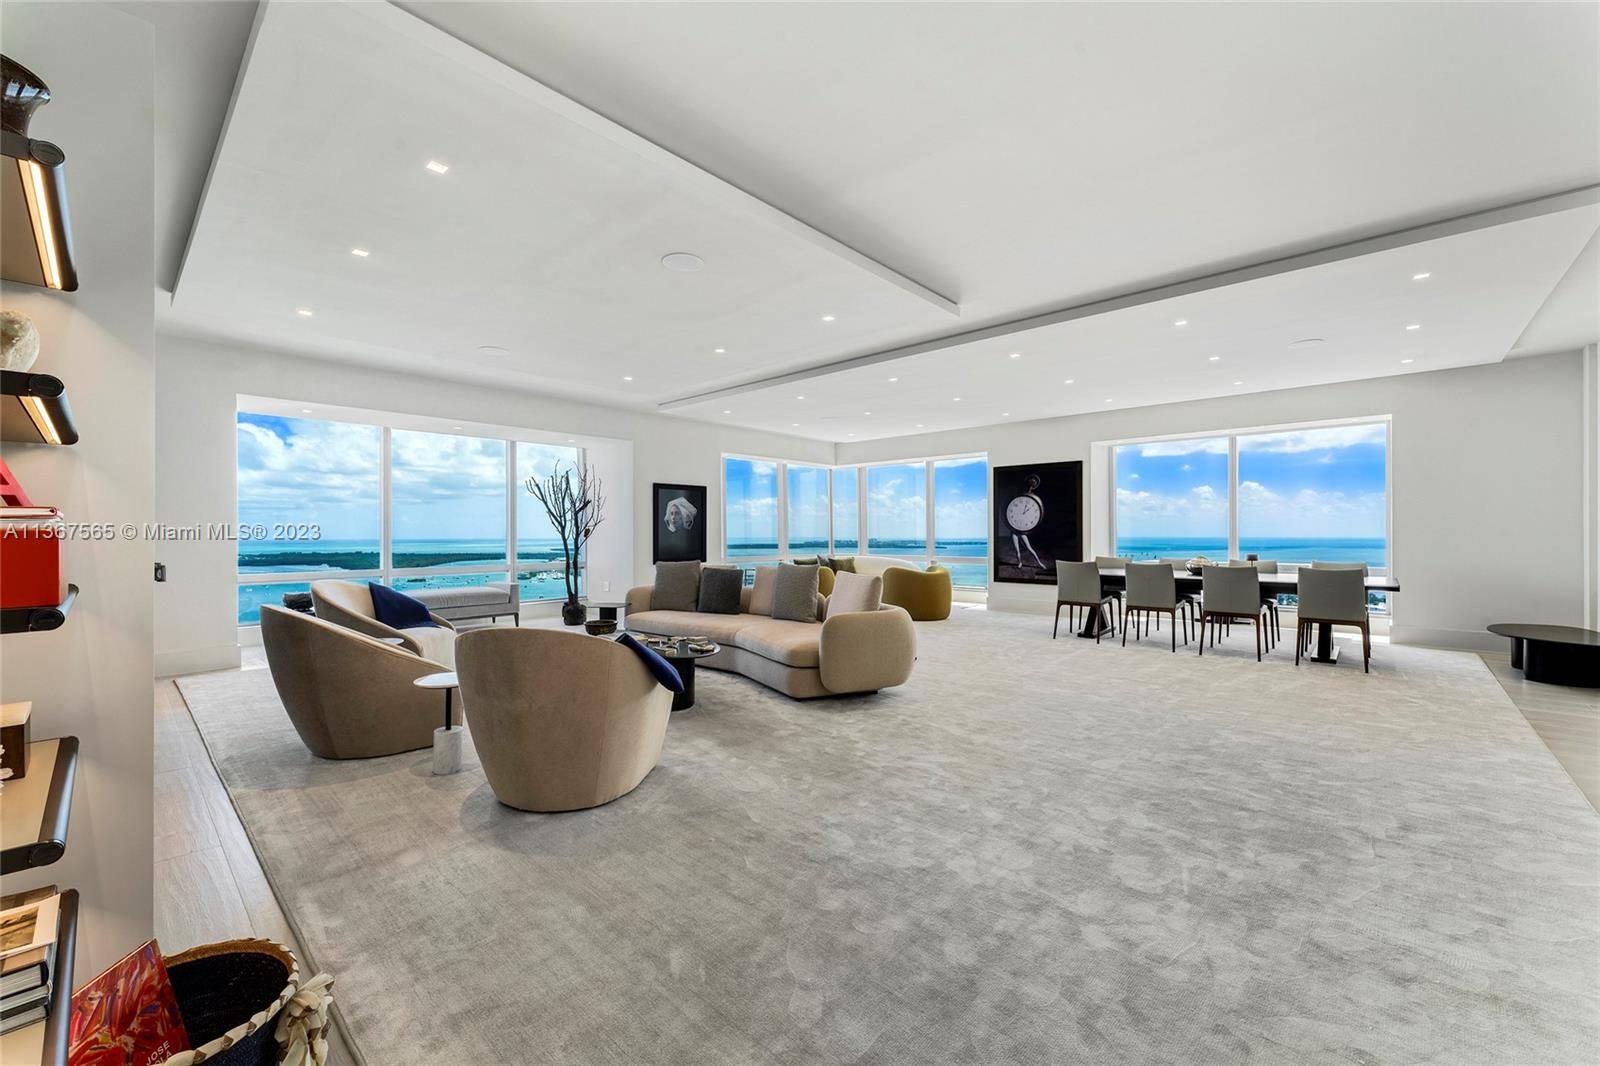 This spectacular newly renovated contemporary corner unit at the exclusive Four Seasons Miami offers 3BR 4 1BA 3, 913 SF of beautifully proportioned interiors w amazing unobstructed views far as ...